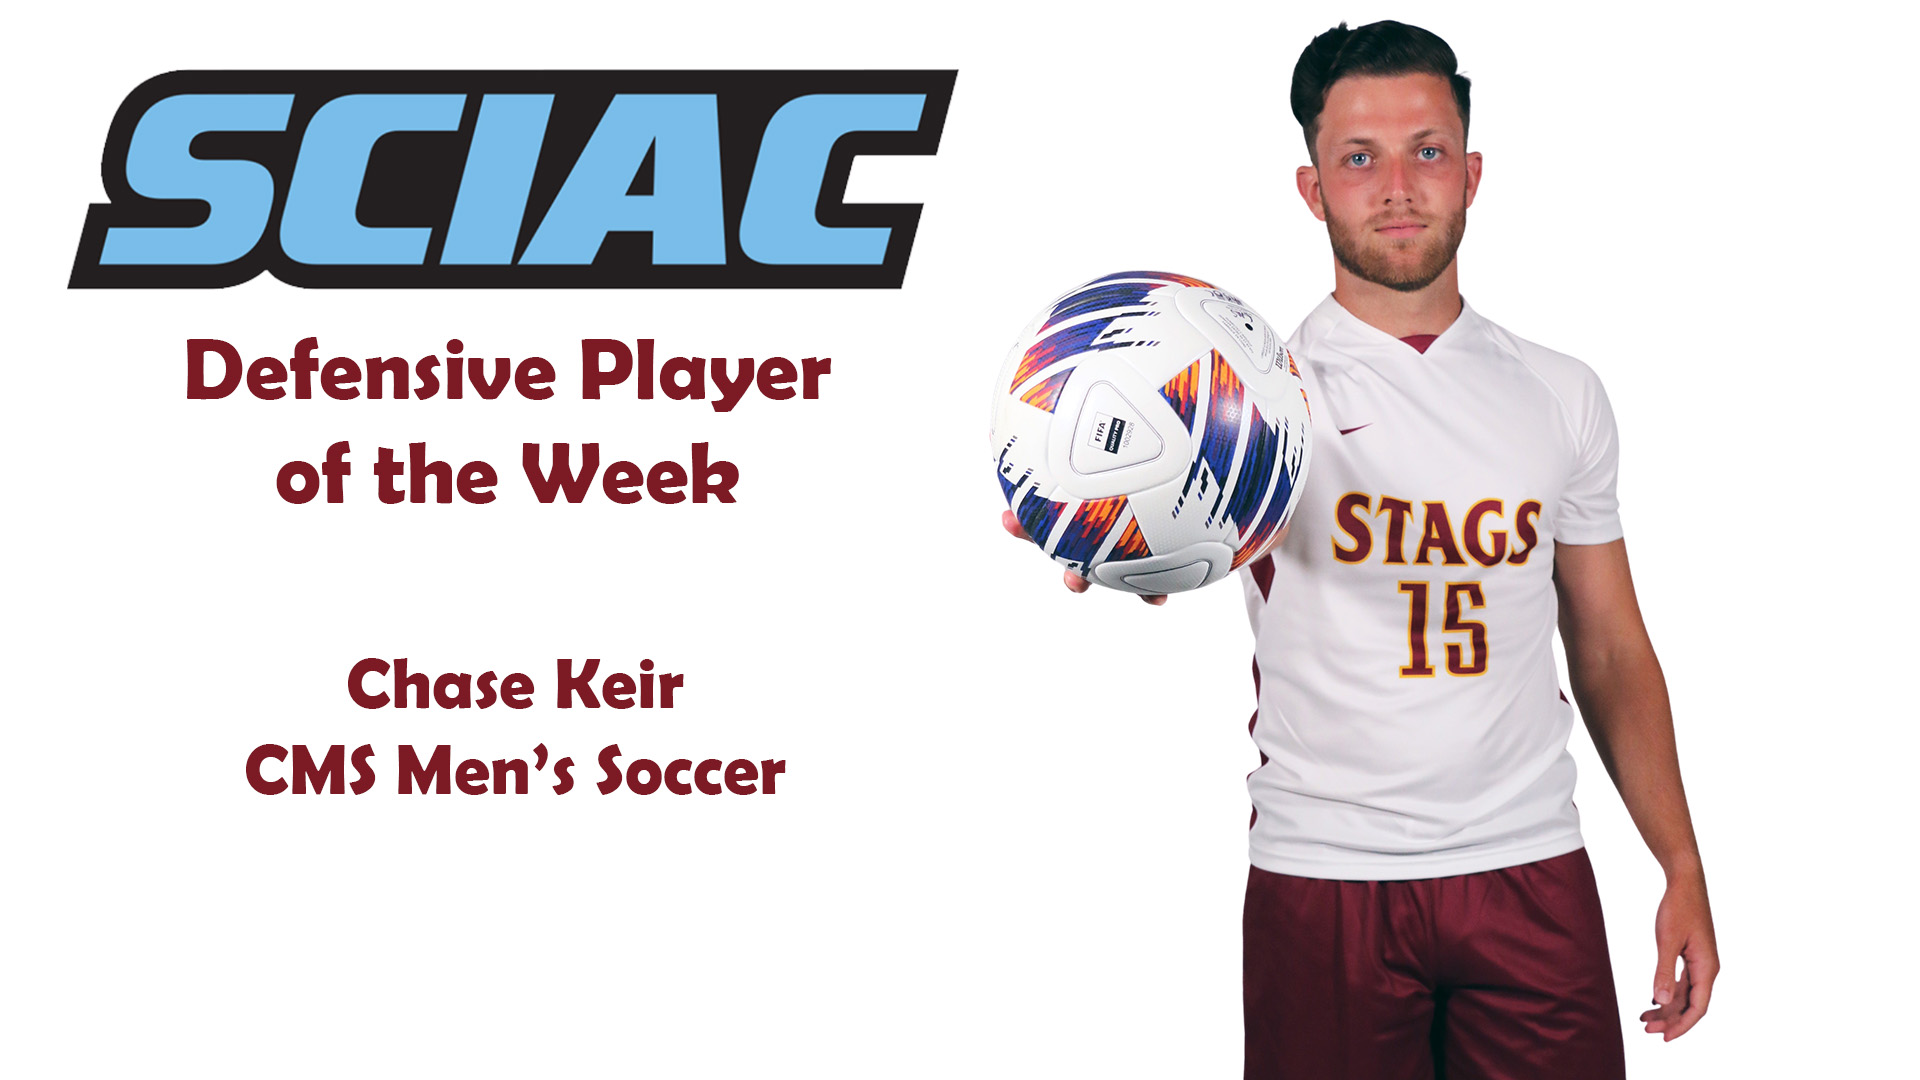 Posed shot of Chase Keir with the SCIAC logo 